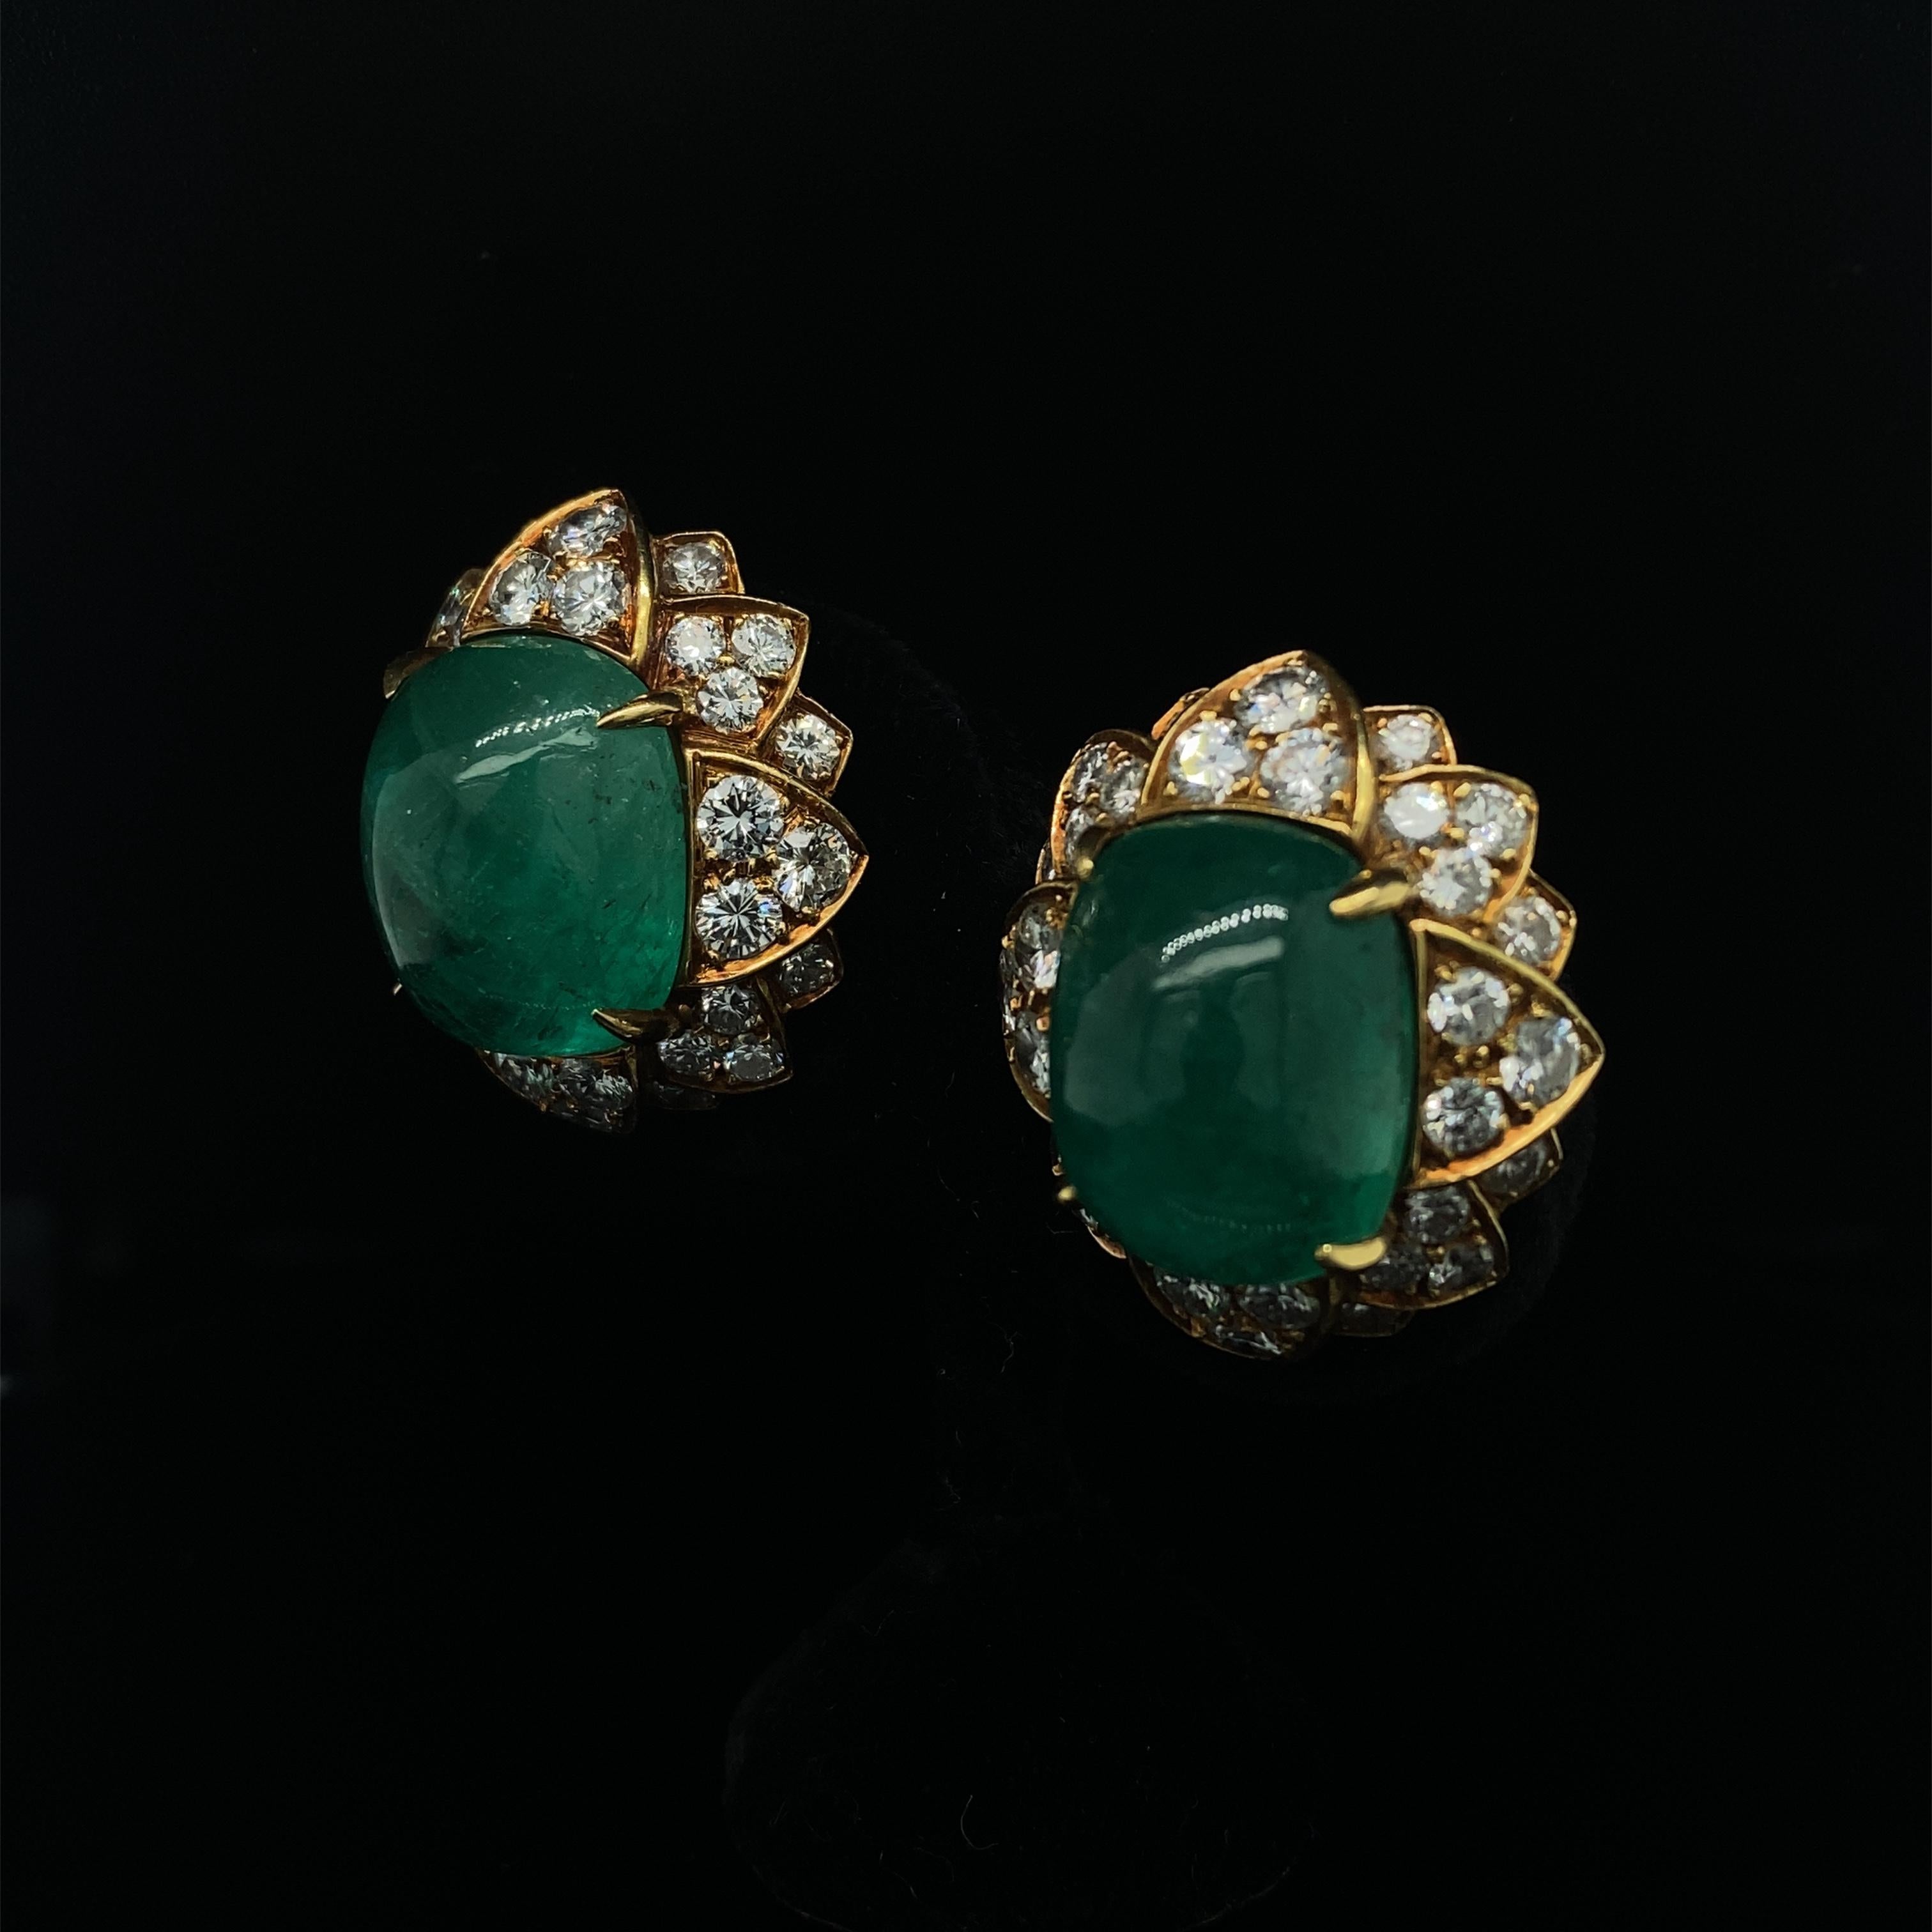 Bulgari emerald and diamond earrings 18kt yellow gold

An impressive pair of vintage emerald and diamond set cluster earrings, by Bulgari each cluster is set with a deep hued, lively cabochon emerald and petal style grain set round brilliant cut